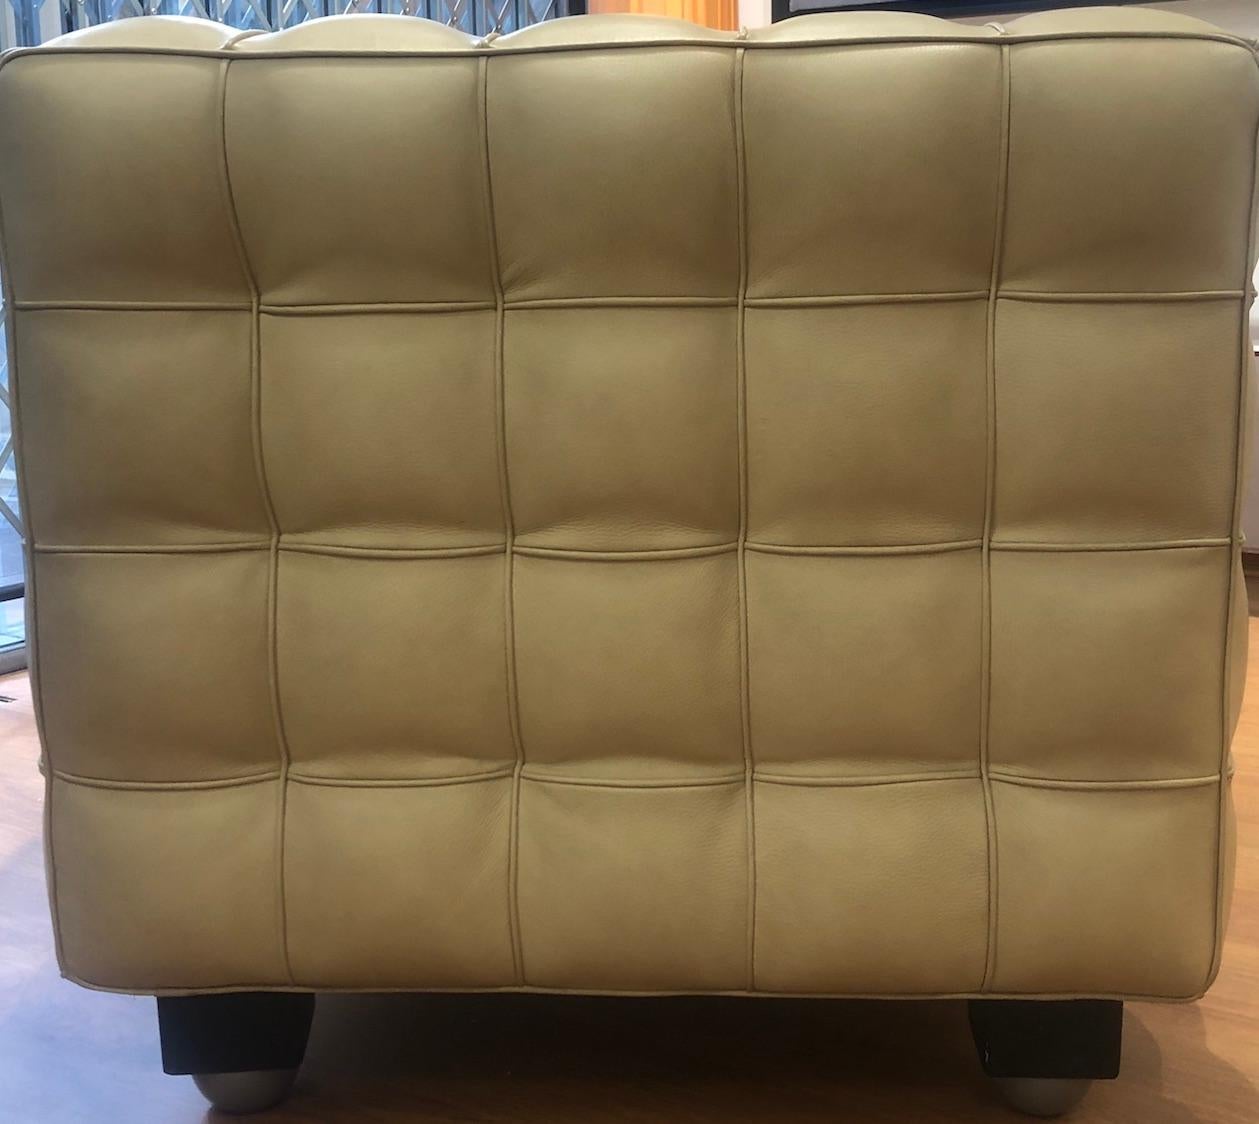 A classic example of Josef Hoffmann’s strict geometrical lines and the quadratic theme in his work is this Kubus sofa. Originally designed in 1910 and handcrafted to perfection.

A wonderful modern sofa, firm and well proportioned cubes in